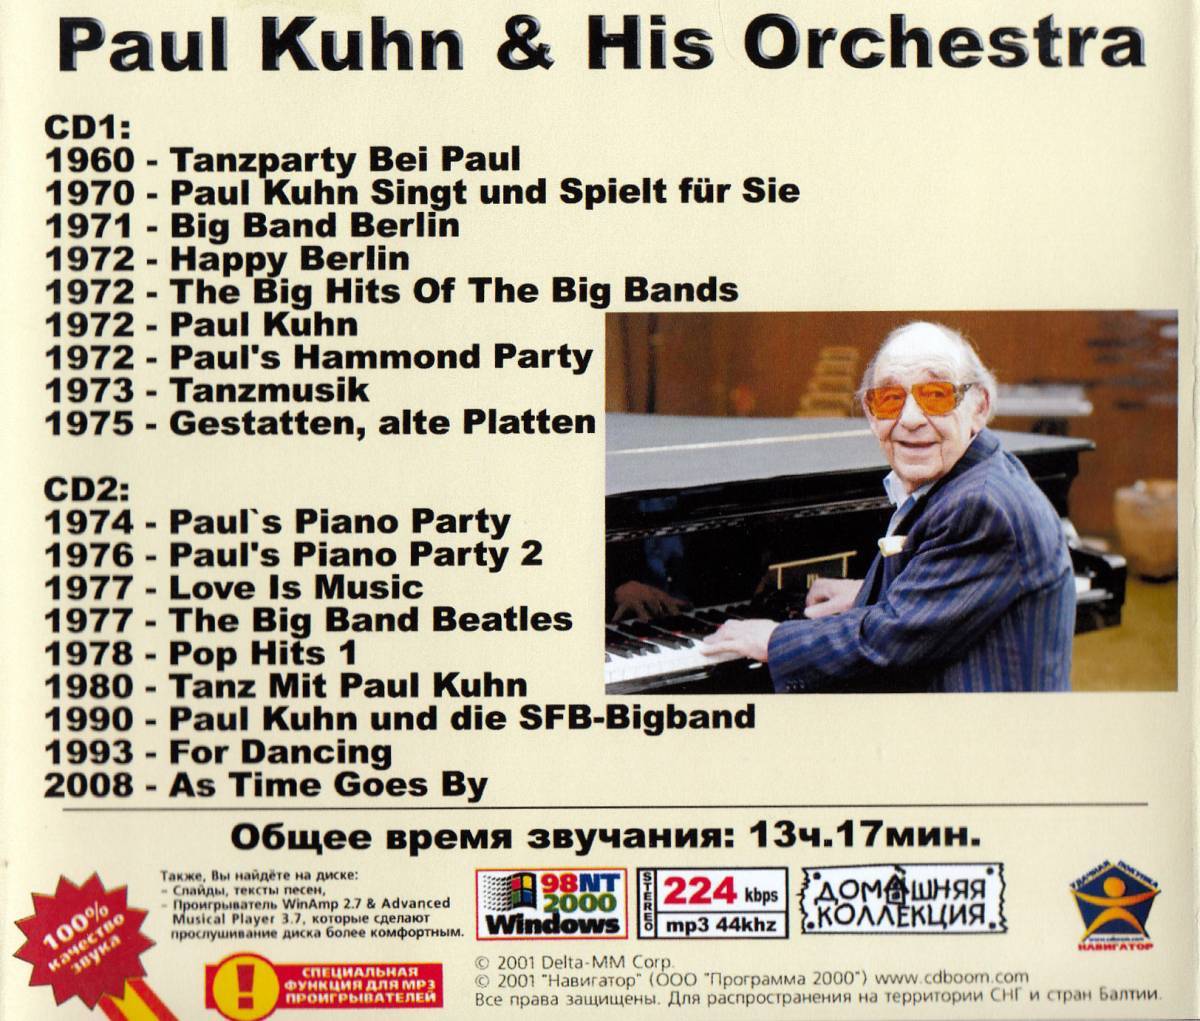 【MP3-CD】 Paul Kuhn & His Orchestra ポール・クーン Part-1-2 2CD 18アルバム収録_画像2